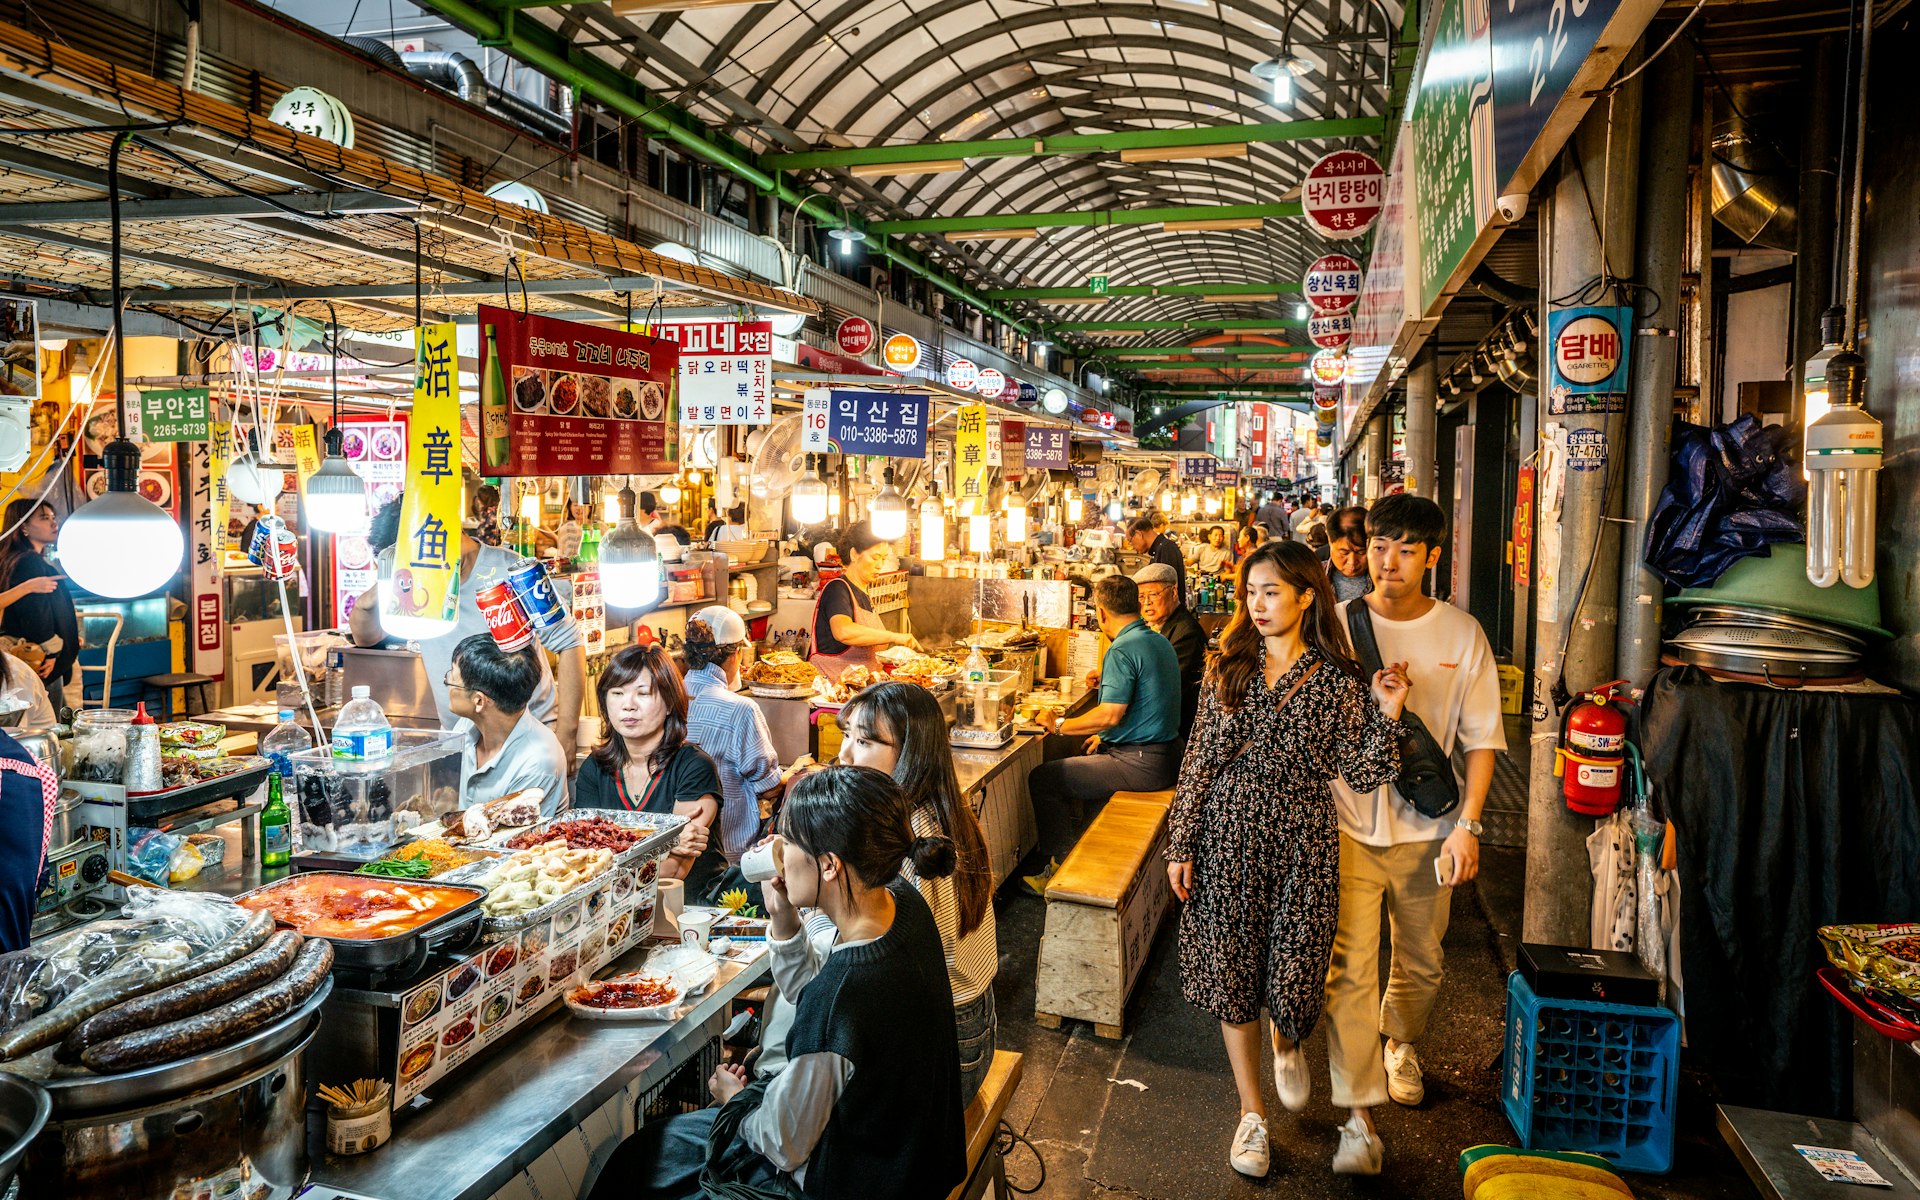 View of an alley of the Kwangjang market at night with people eating street food at stalls